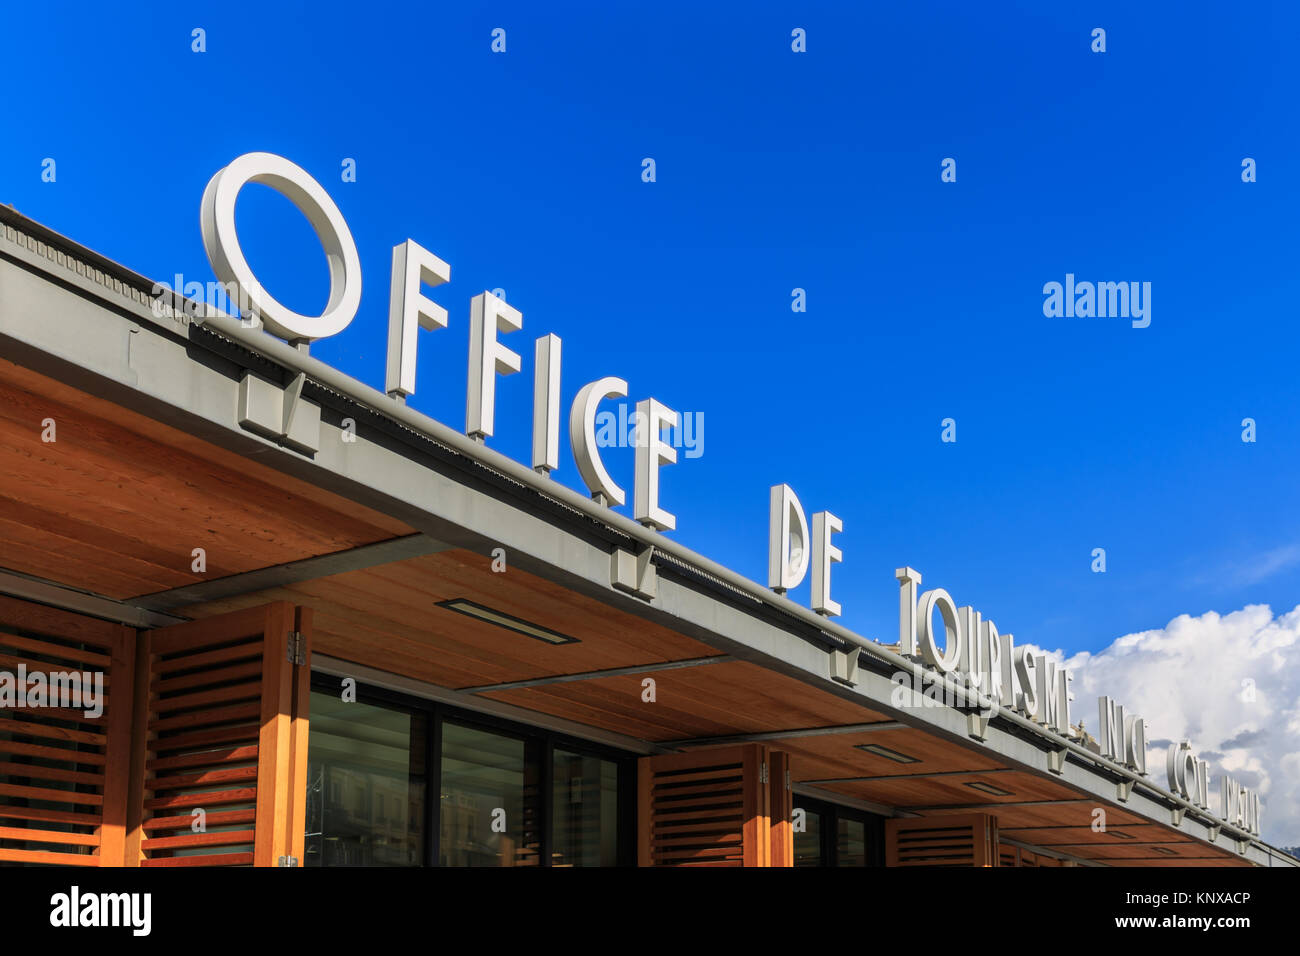 Office de Tourisme Nice Cote d'Azur, sign above the touristm office in Nice, French Riviera, France Stock Photo